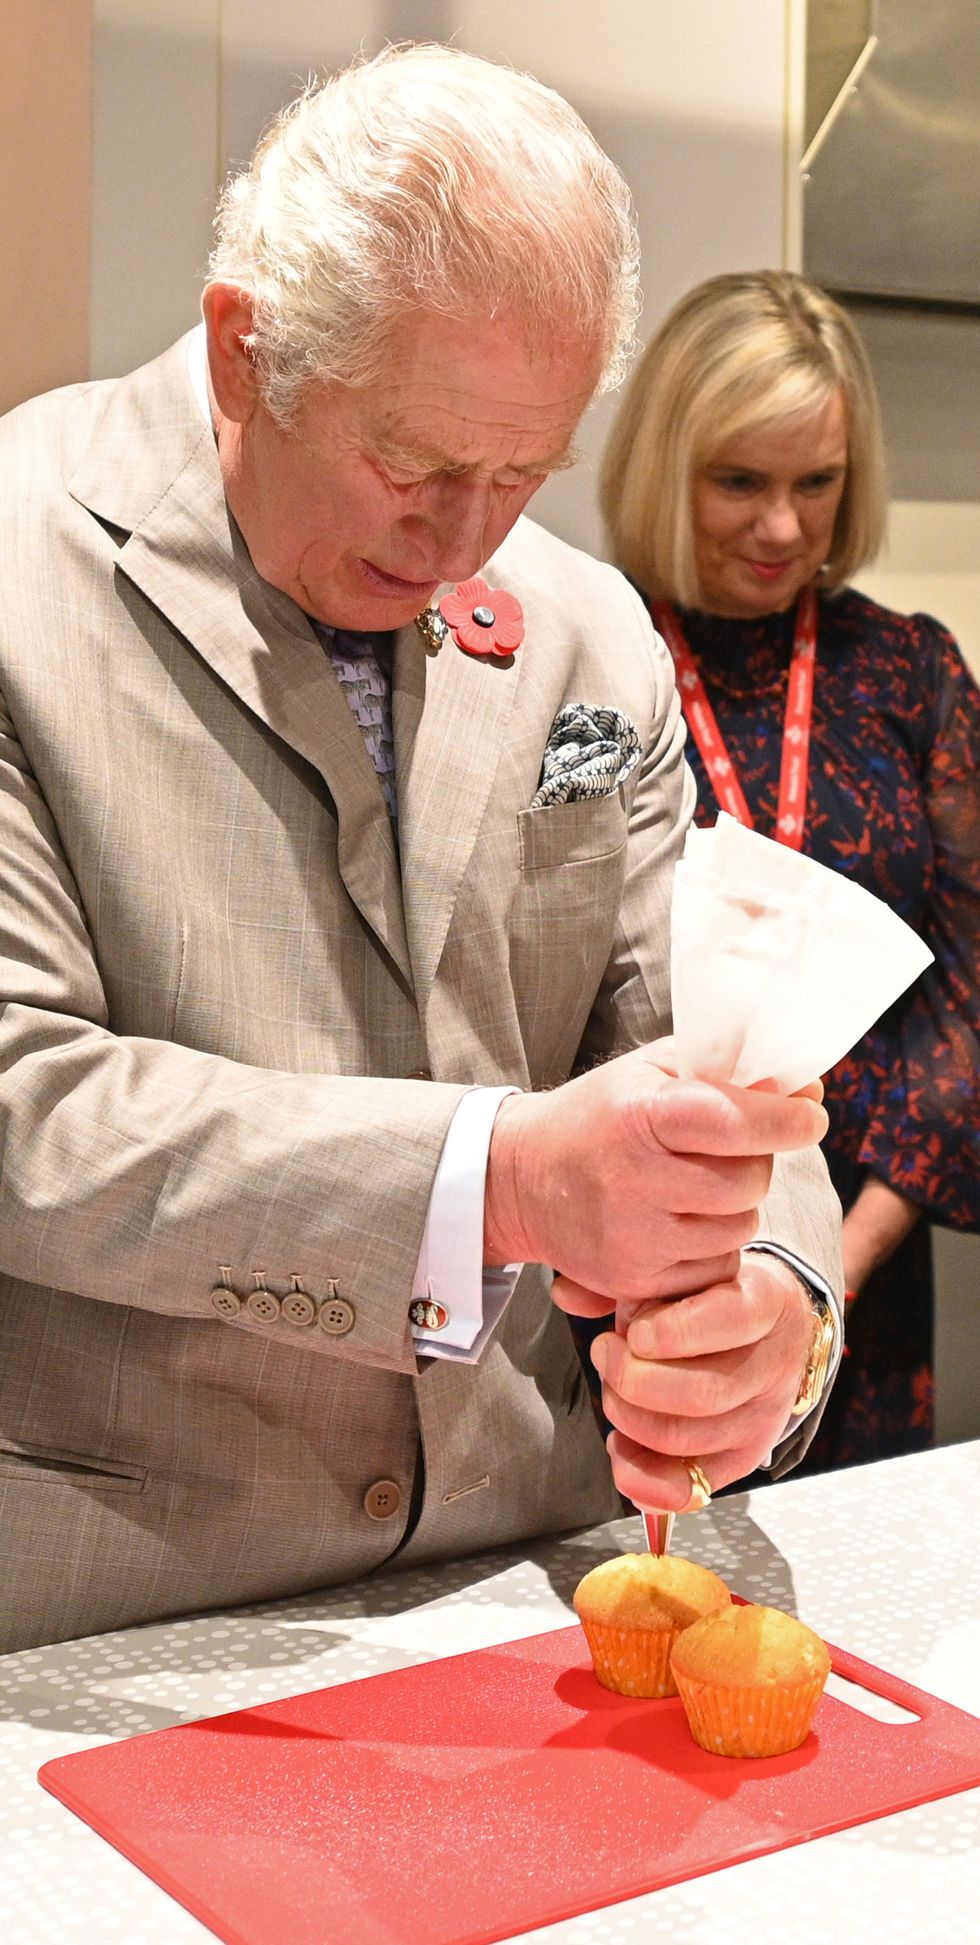 The Prince of Wales tries his hand at decorating cupcakes (Oli Scarff/PA)